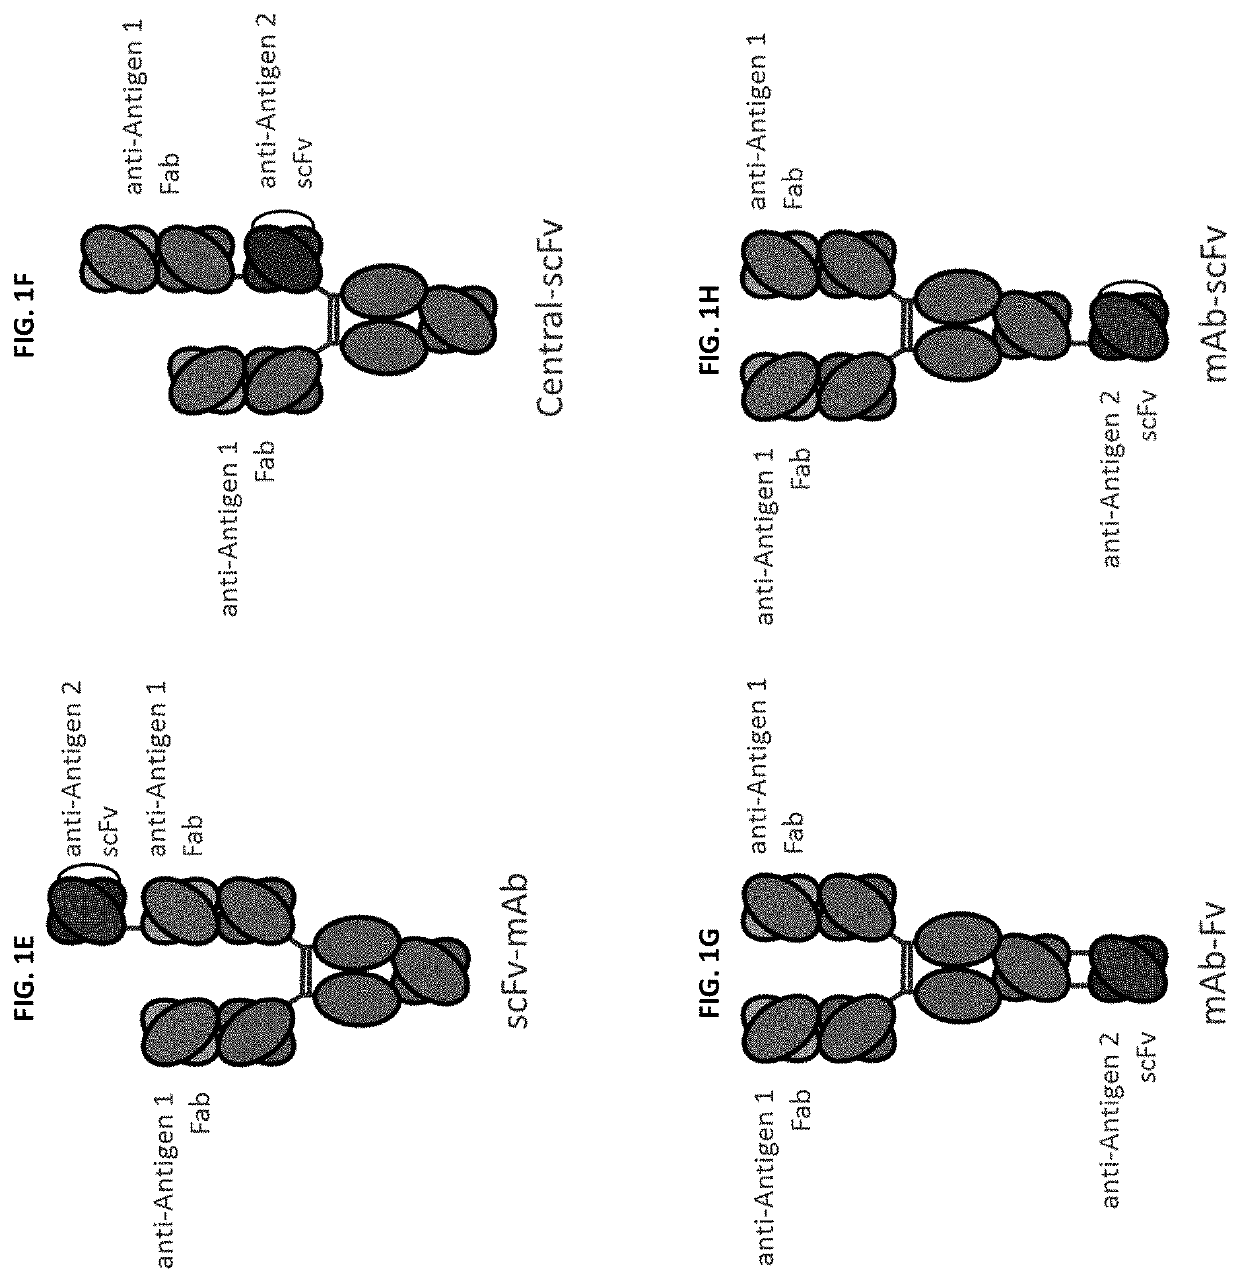 Bispecific and monospecific antibodies using novel anti-PD-1 sequences